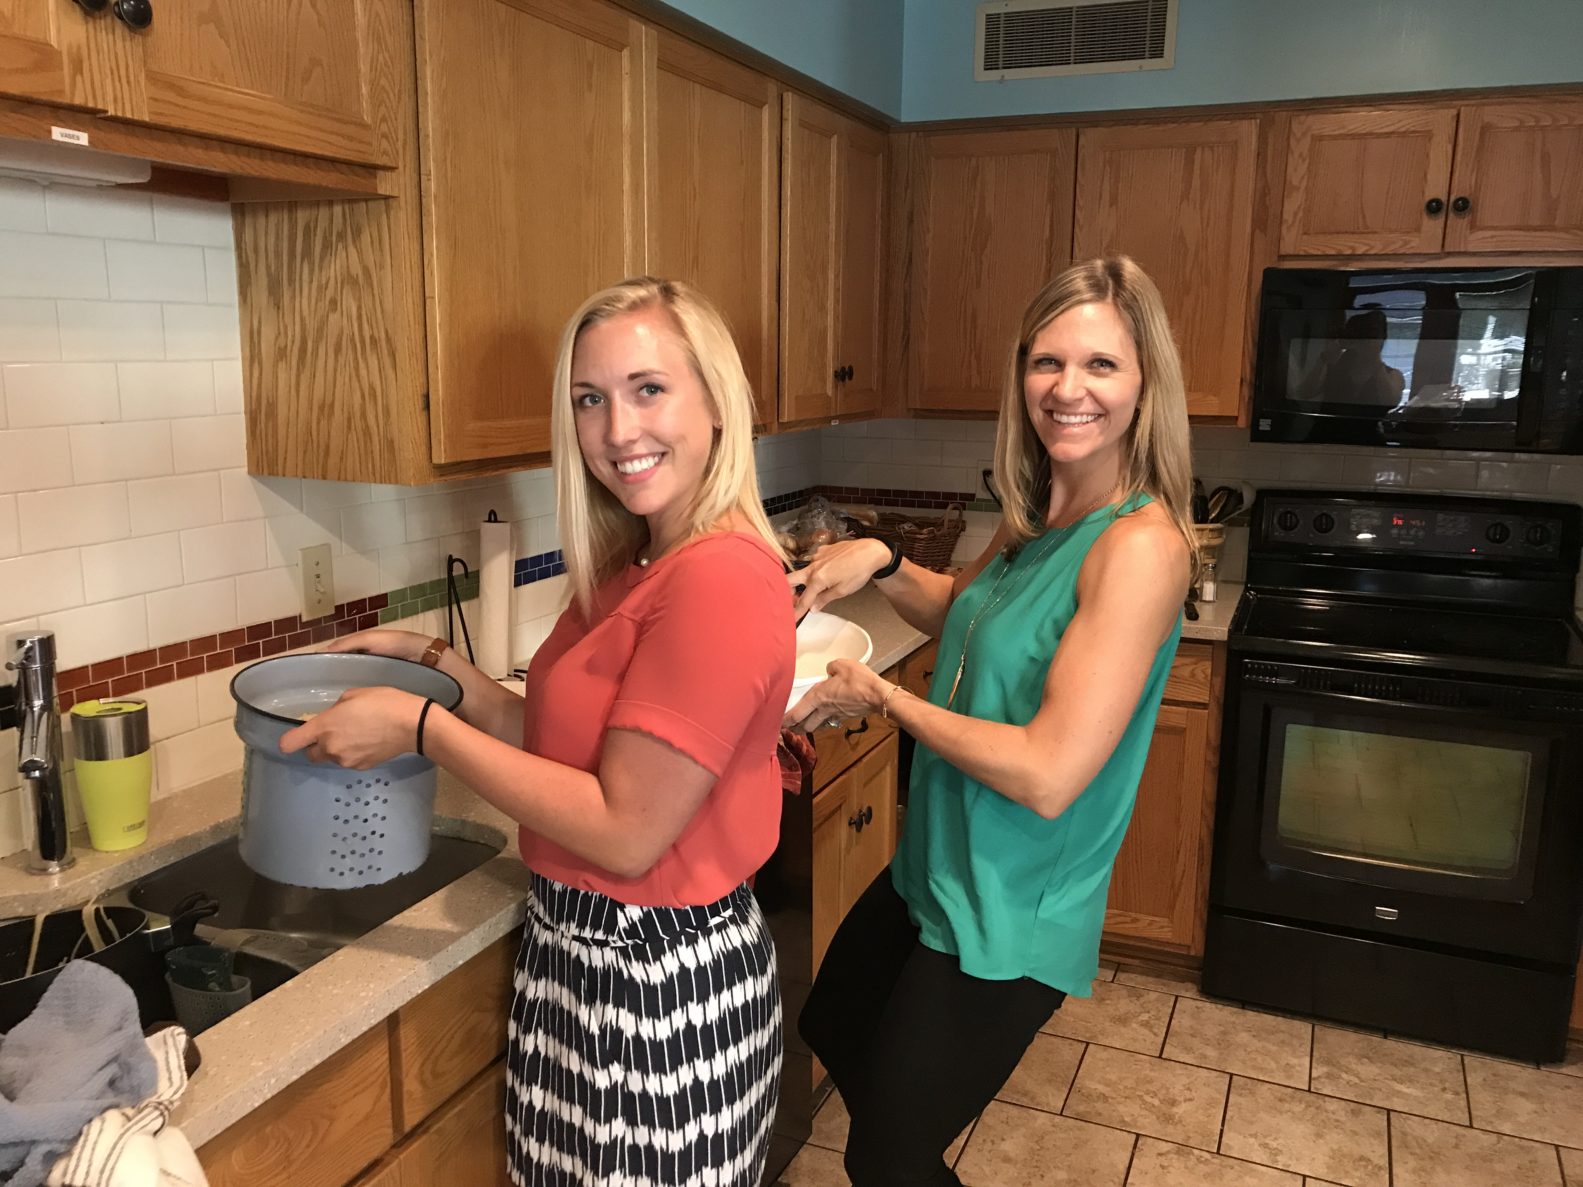 McCownGordon associates giving back by making meals for Ronald McDonald residents.